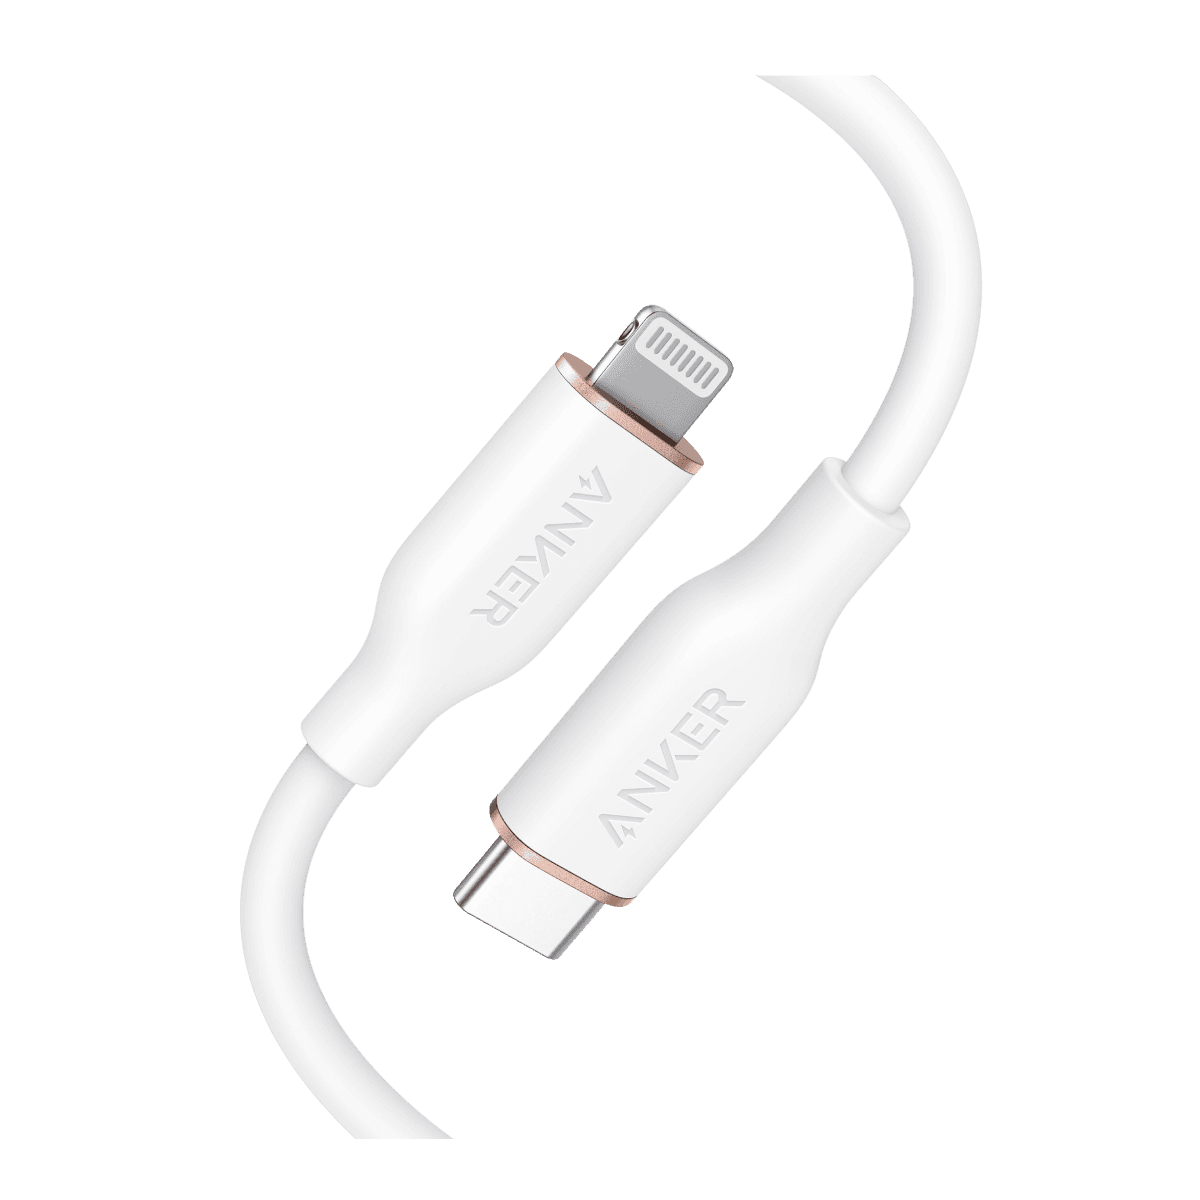 Anker <b>641</b> USB-C to Lightning Cable (Flow, 3ft Silicone)